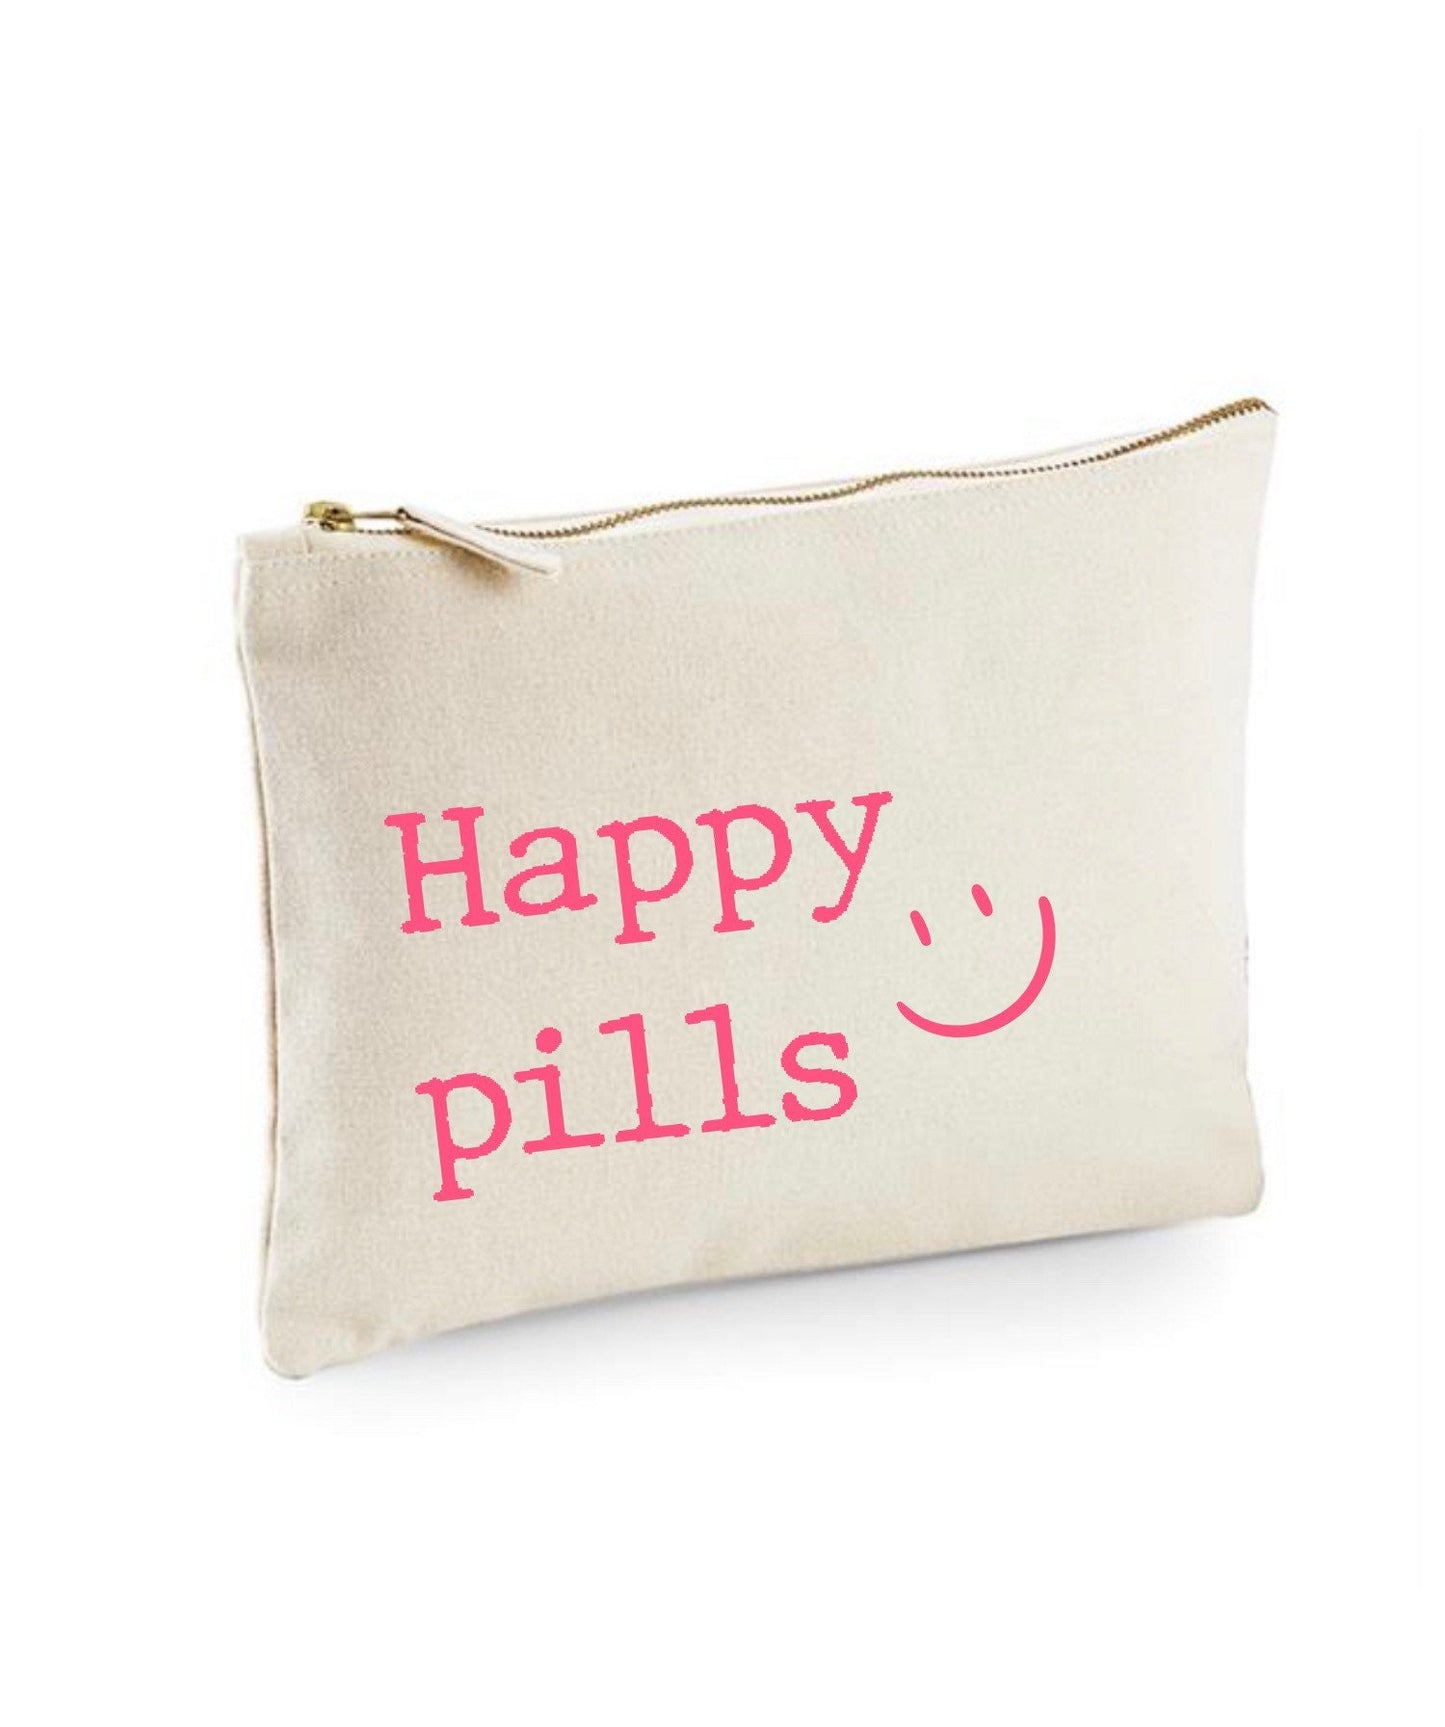 Happy pills storage case, mental health medication pouch for home, work and travel, antidepressant tablet case